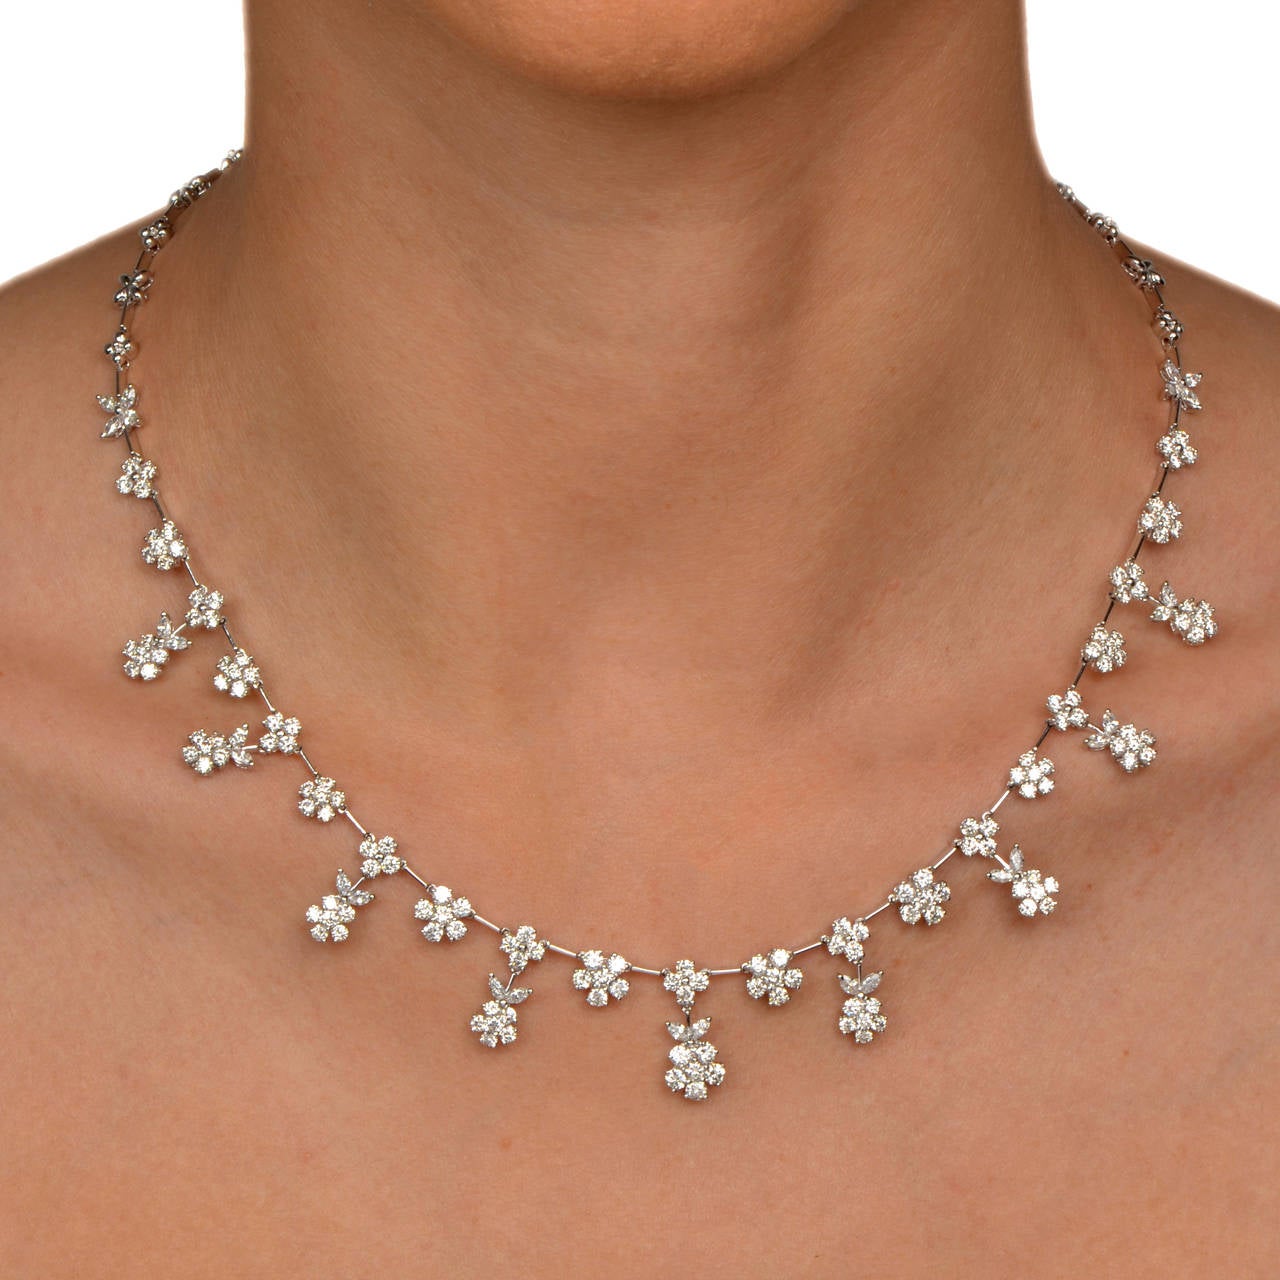 This dazzling and very feminine necklace is crafted in solid 18K solid white gold. This gorgeous diamond piece displays a flower shaped motif throughout and is accented with 158 genuine round cut diamonds and 26 genuine marquise cut diamonds all